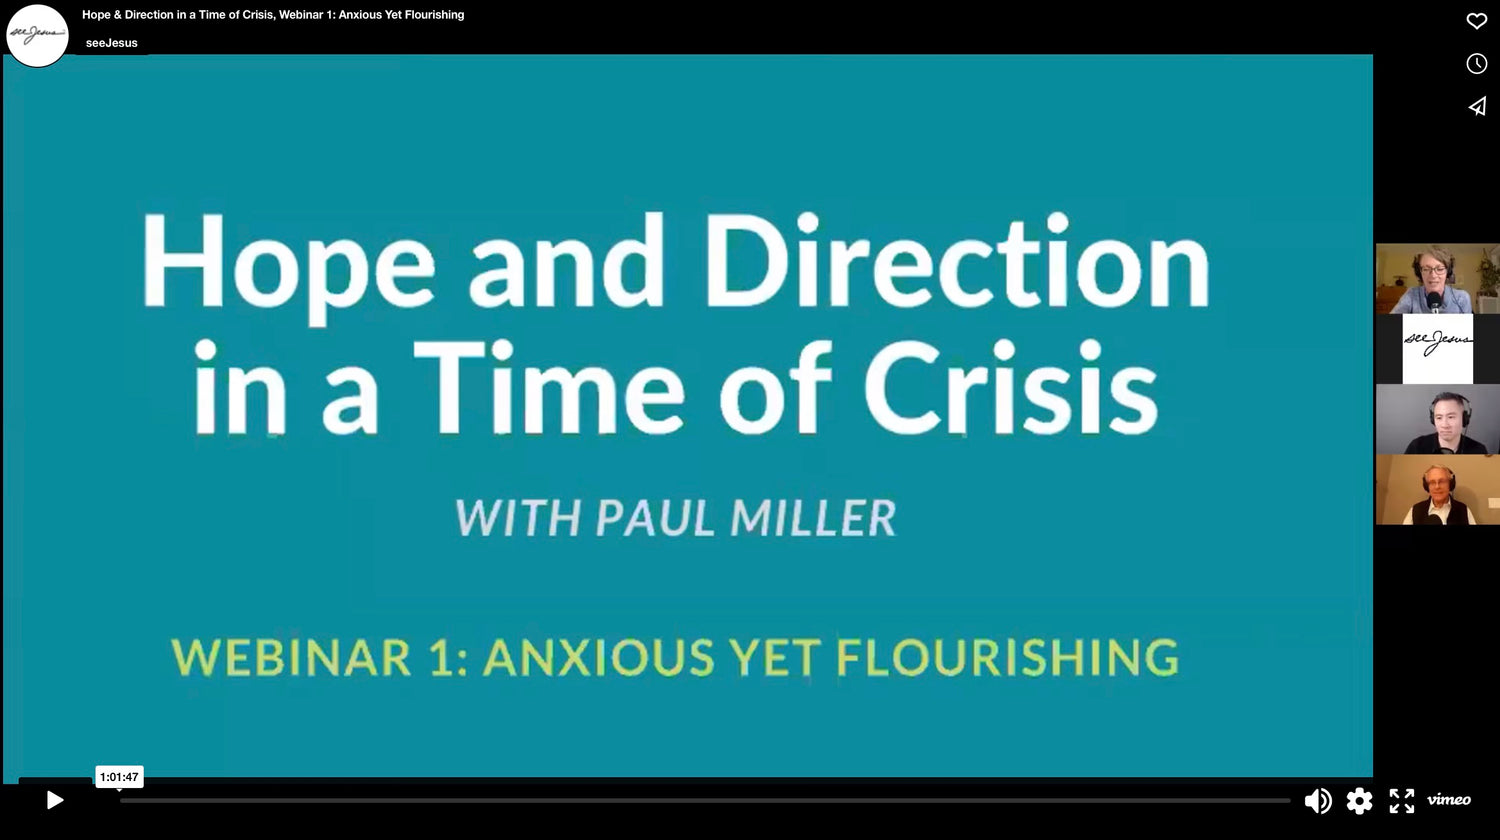 Anxious Yet Flourishing: Hope & Direction in a Time of Crisis, Webinar 1